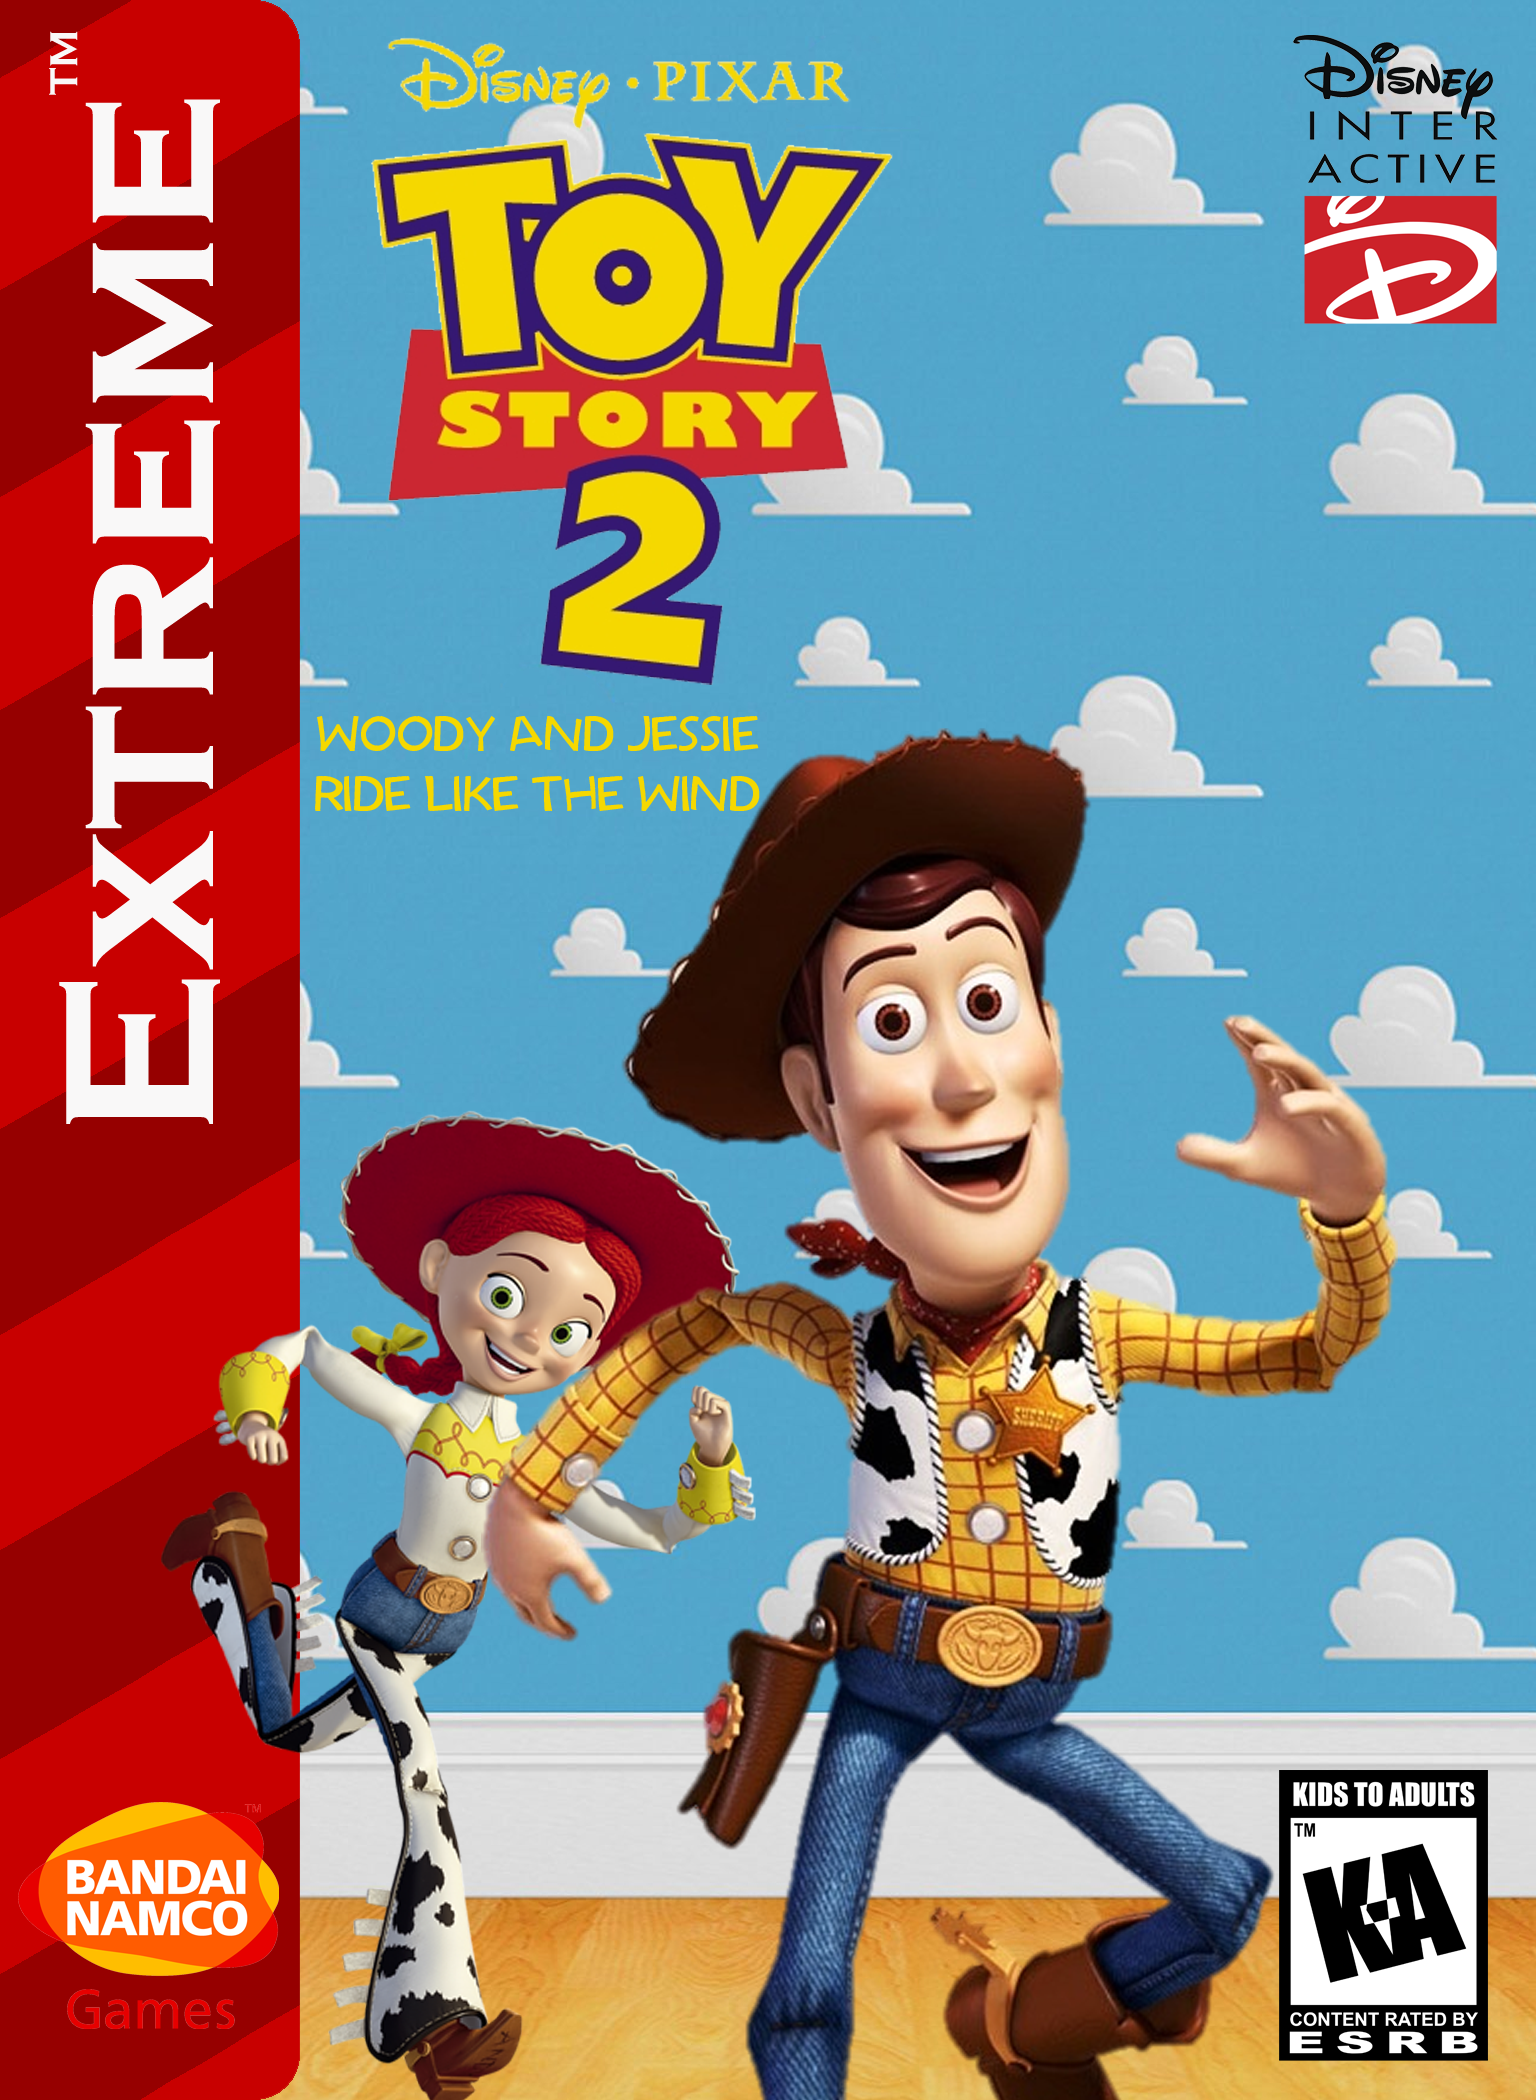 Disney Plus Toy Story 2: Crossing The Road 